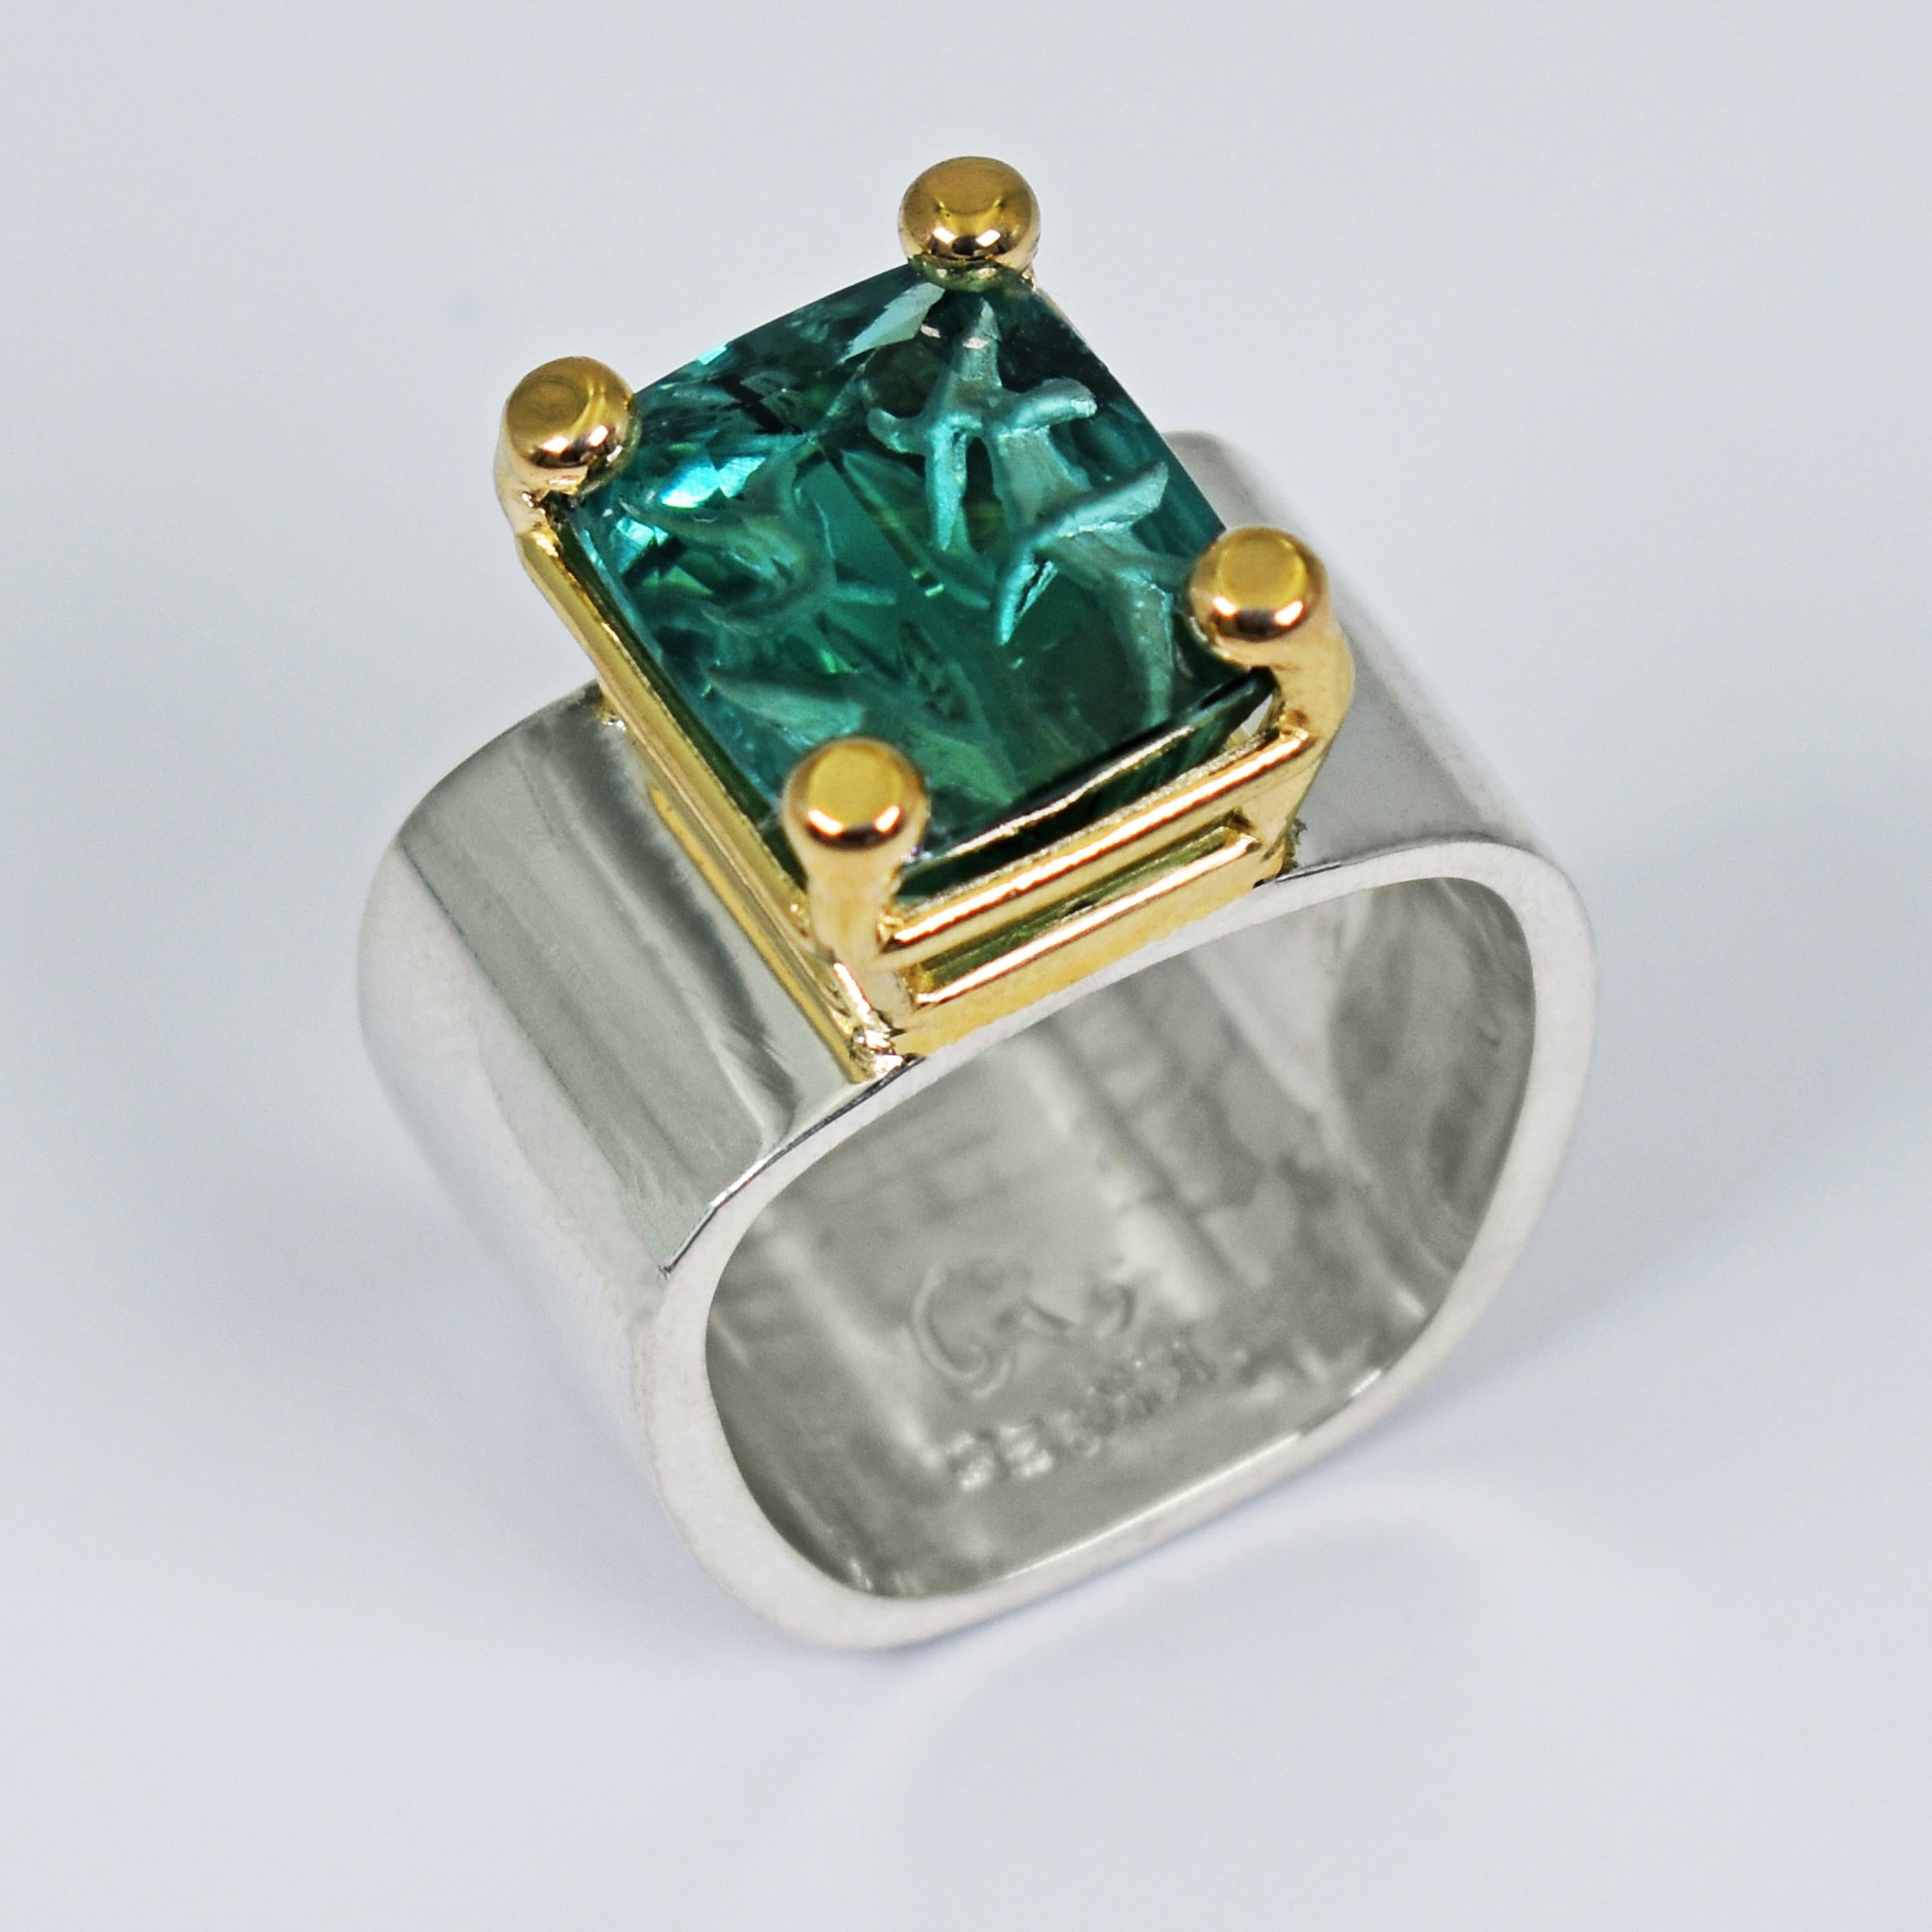 Contemporary Carved 5.39 Carat Indicolite Tourmaline Two-Tone Cocktail Ring